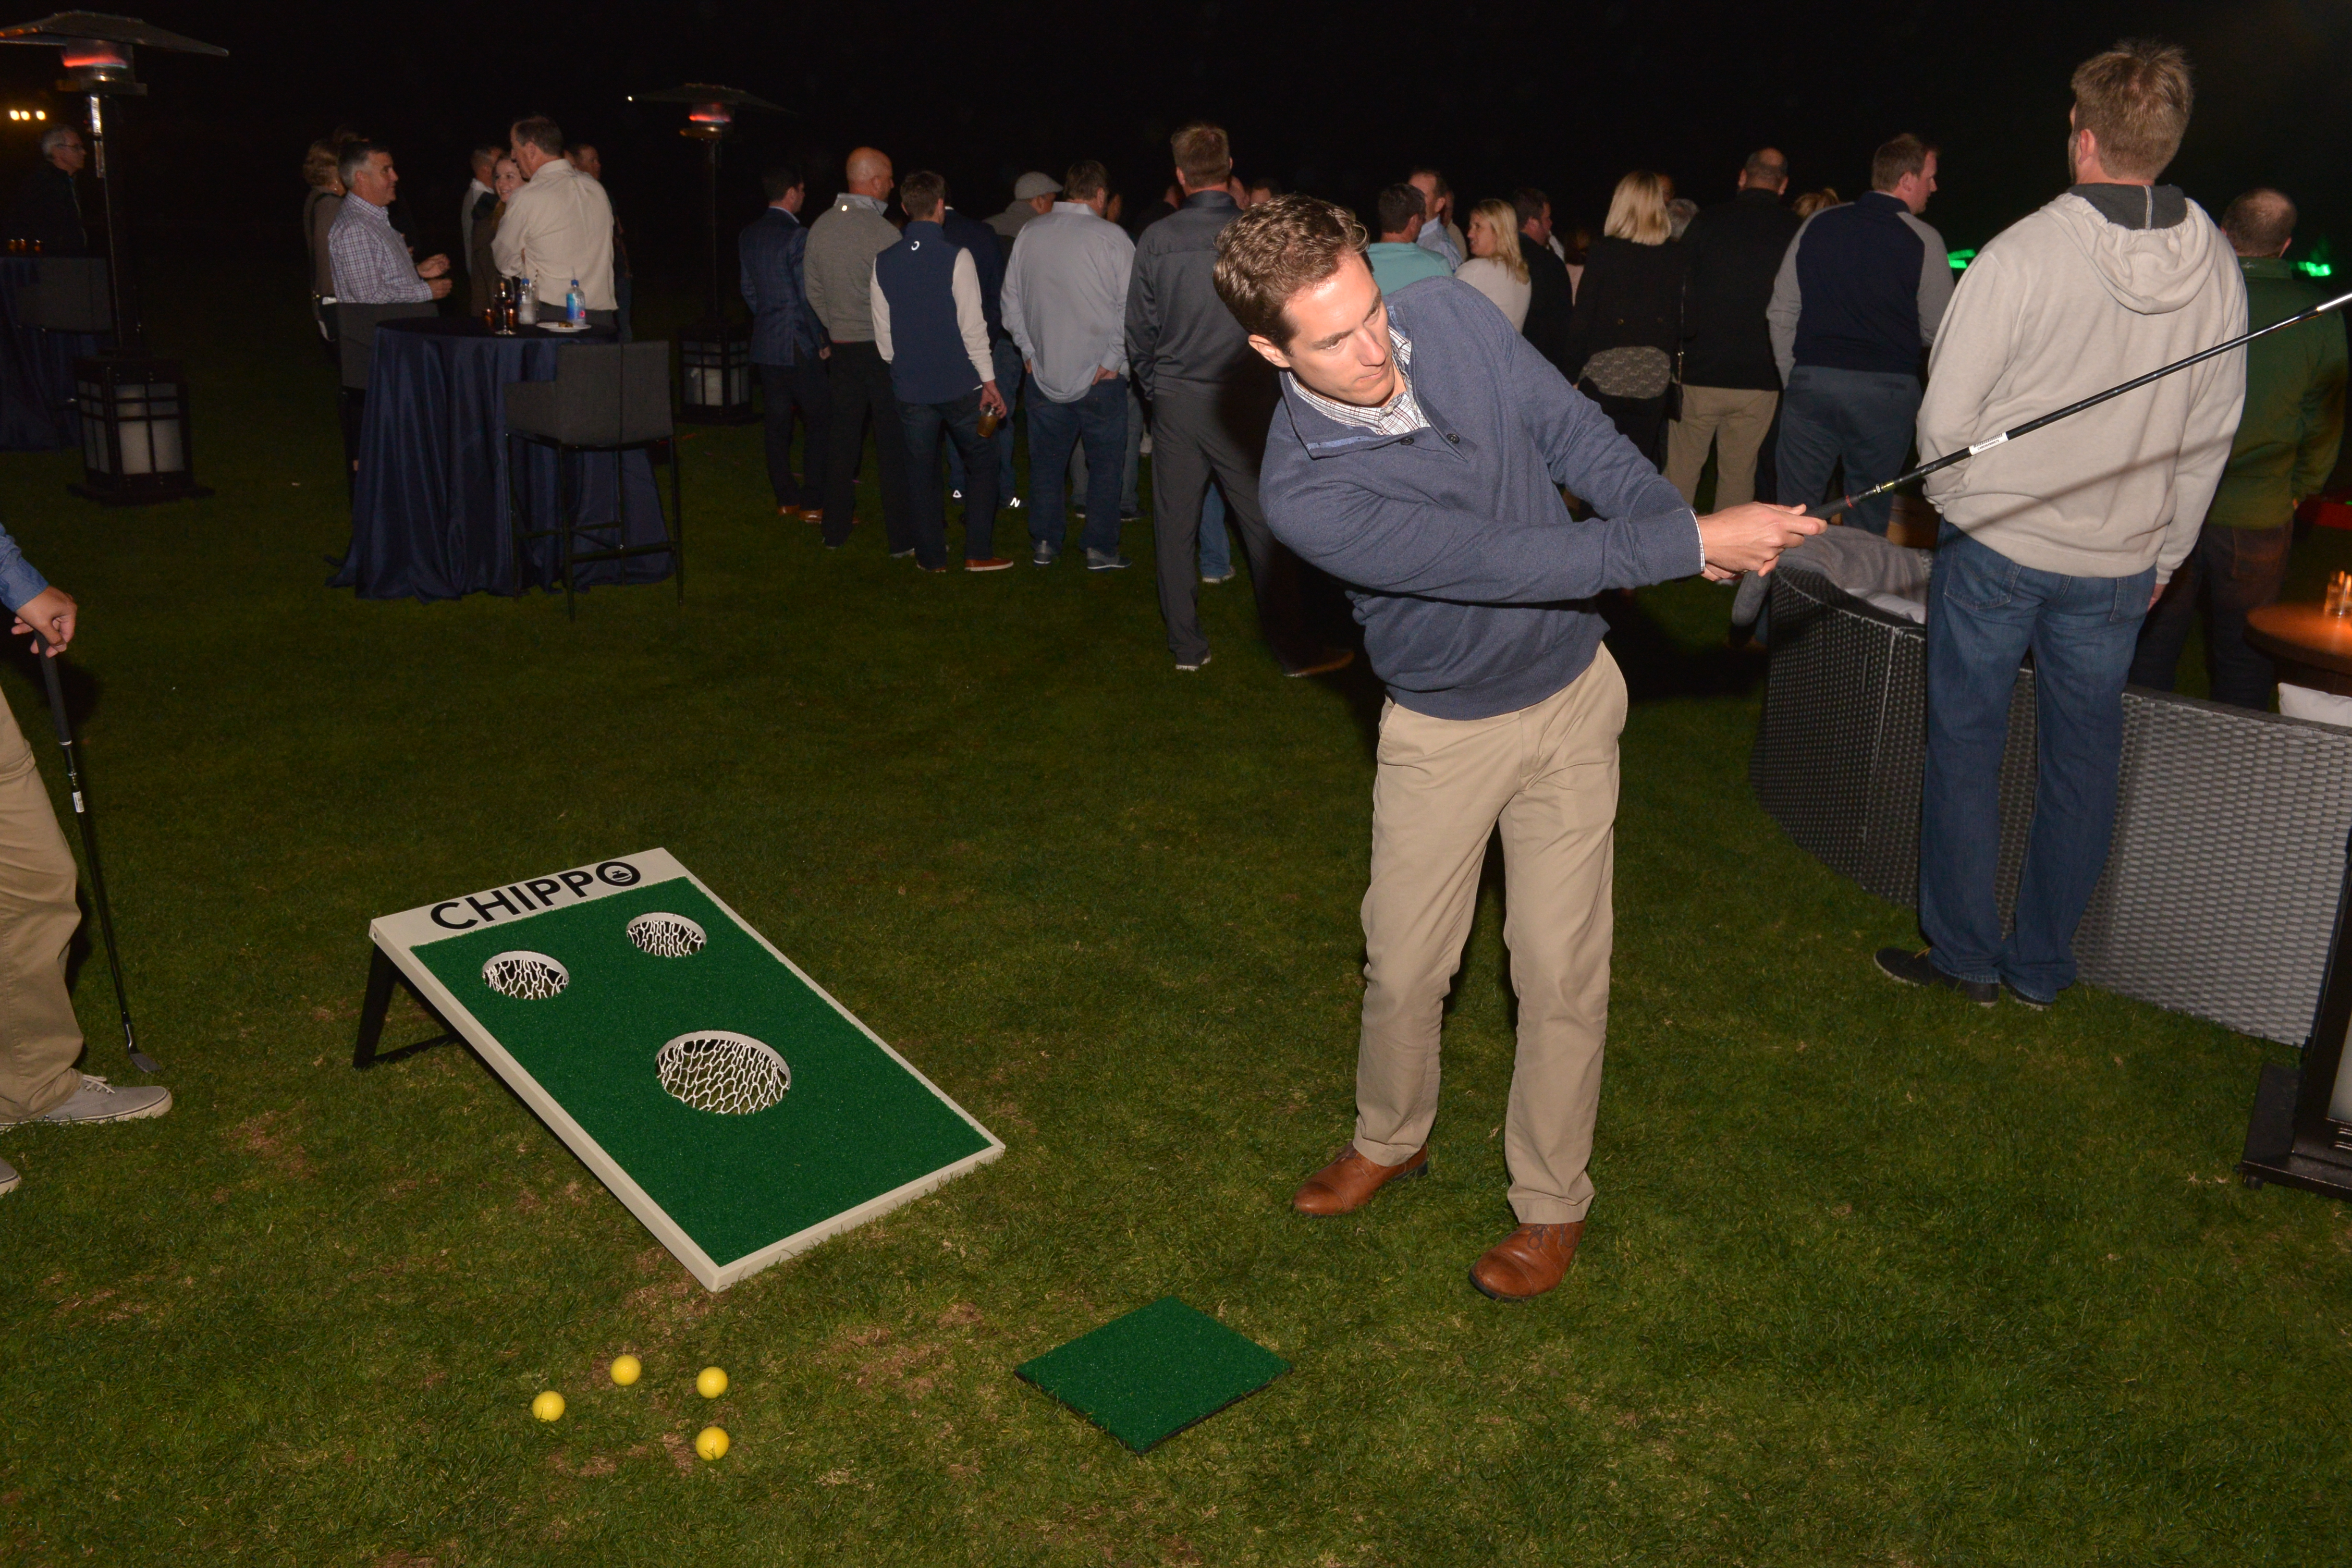 Guests enjoying Chippo Golf on the lawn at the Lodge